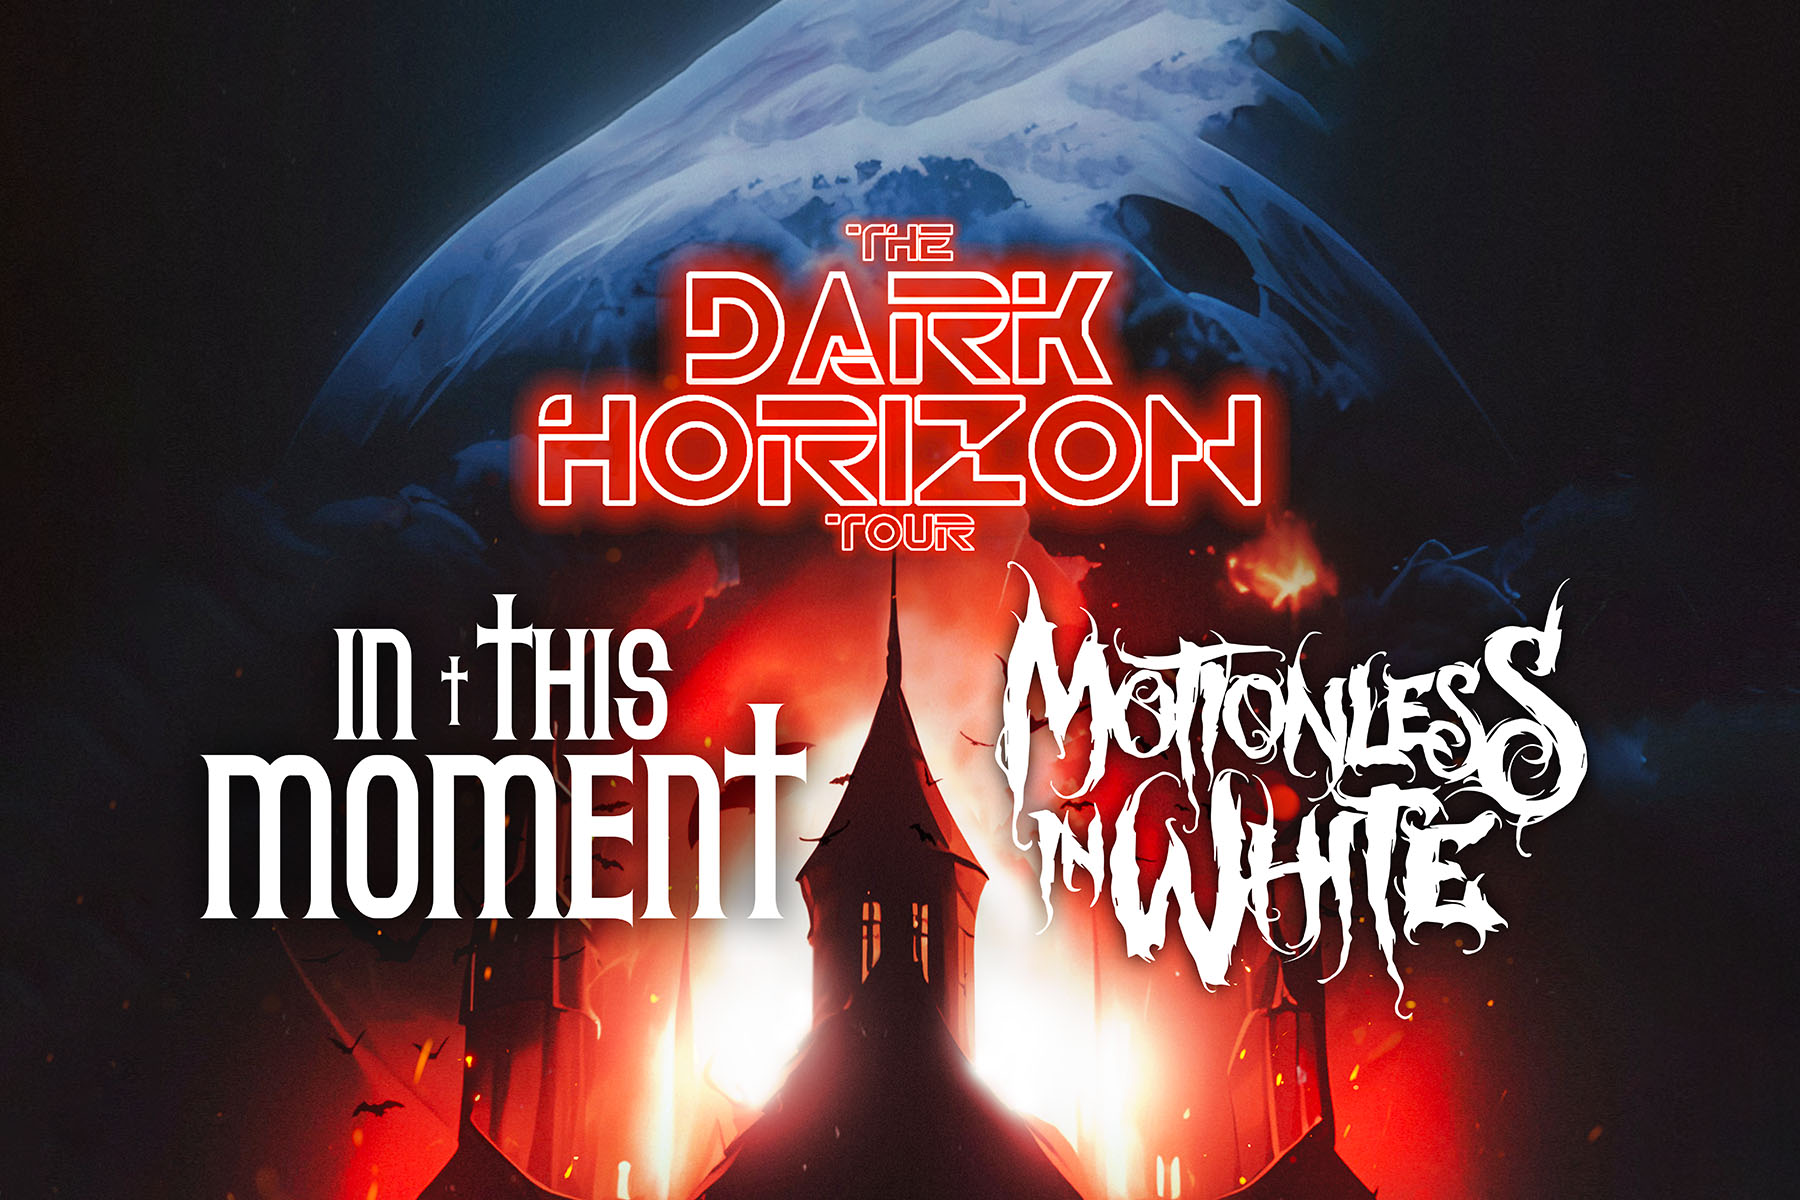 Motionless In White on X: Week 2 of The Dark Horizon Tour is